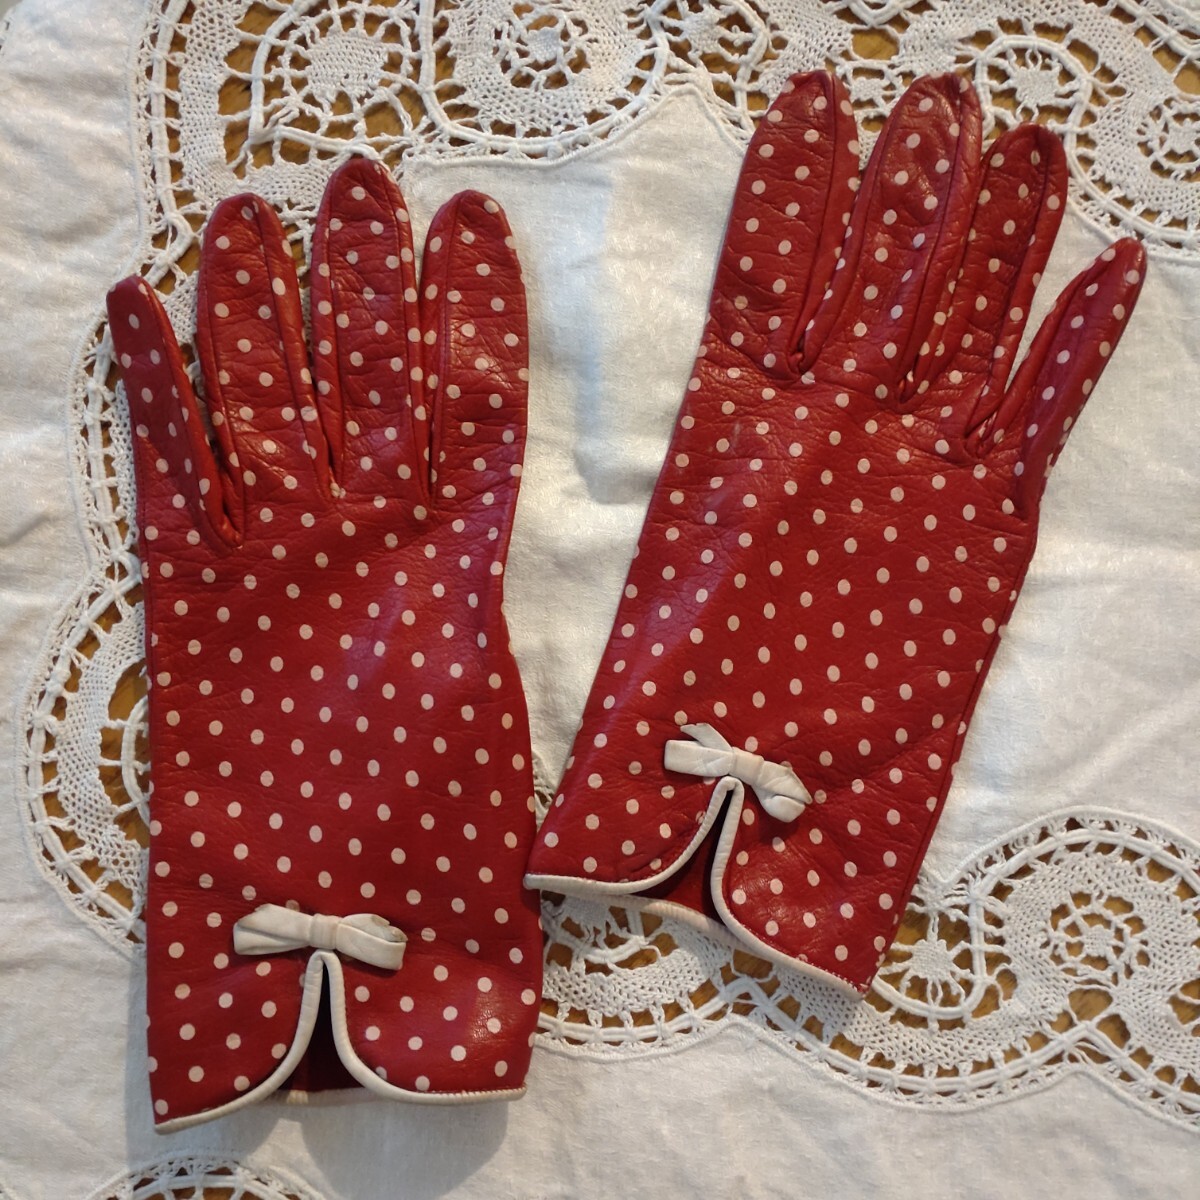  France antique leather glove dot pattern gloves leather leather glove Vintage old clothes 